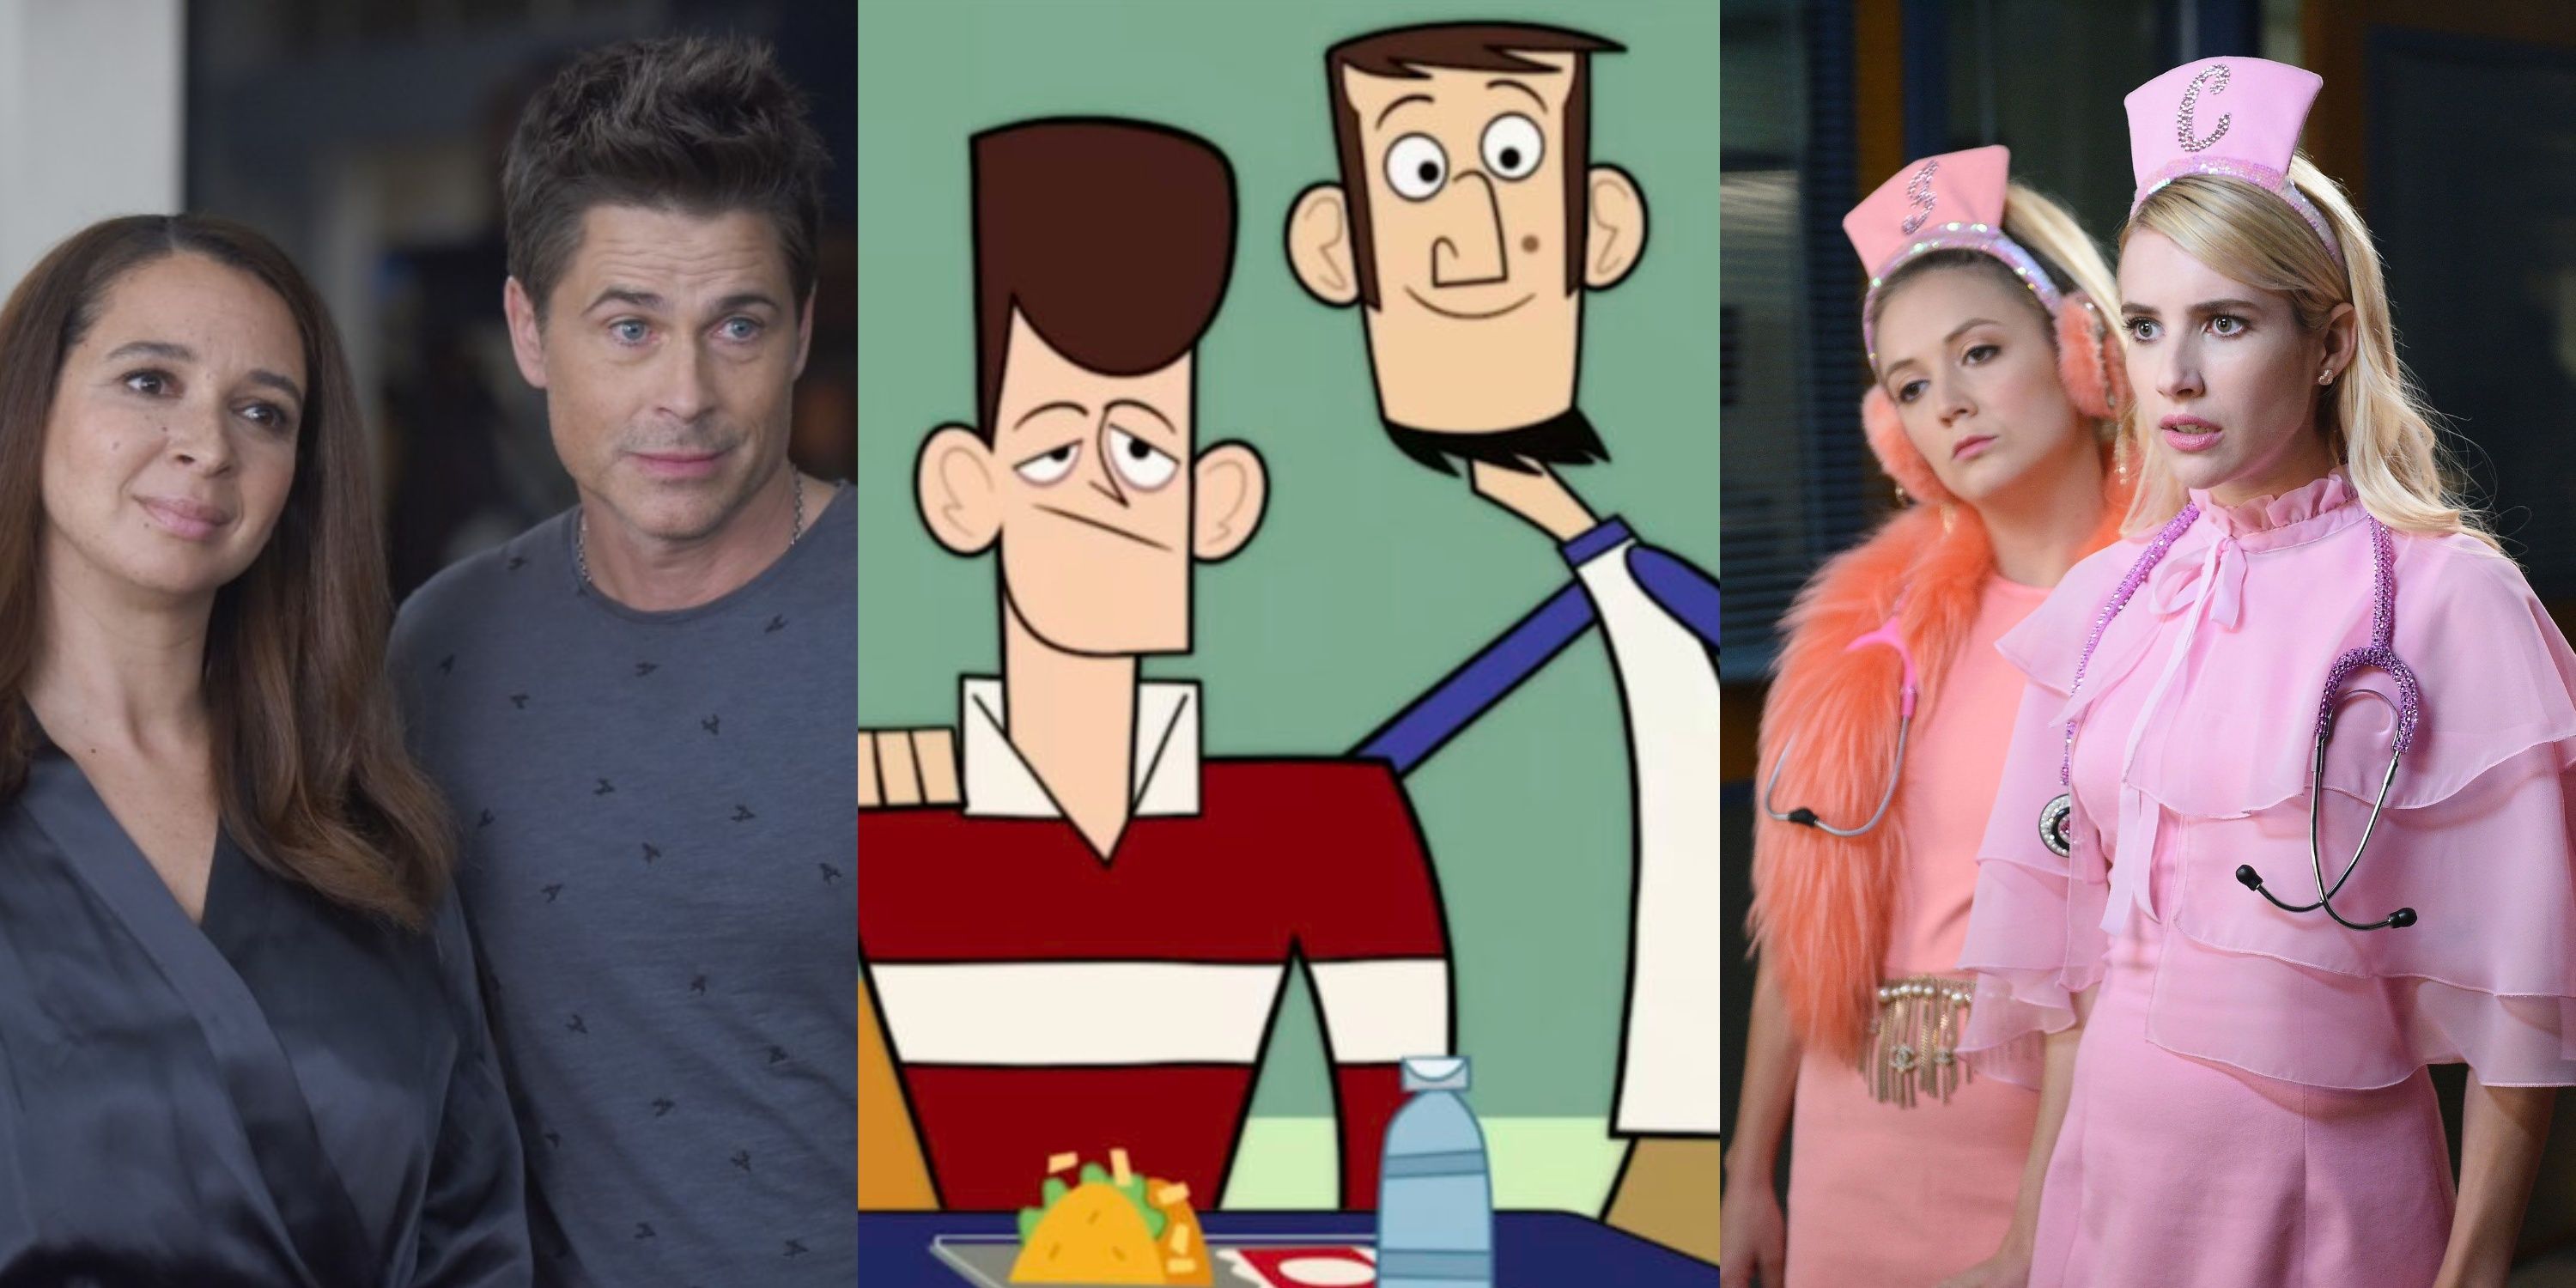 Split image of Jilian & Dean (The Grinder), JFK & Abe (Clone High), and Chanel 1 & 3 (Scream Queens)